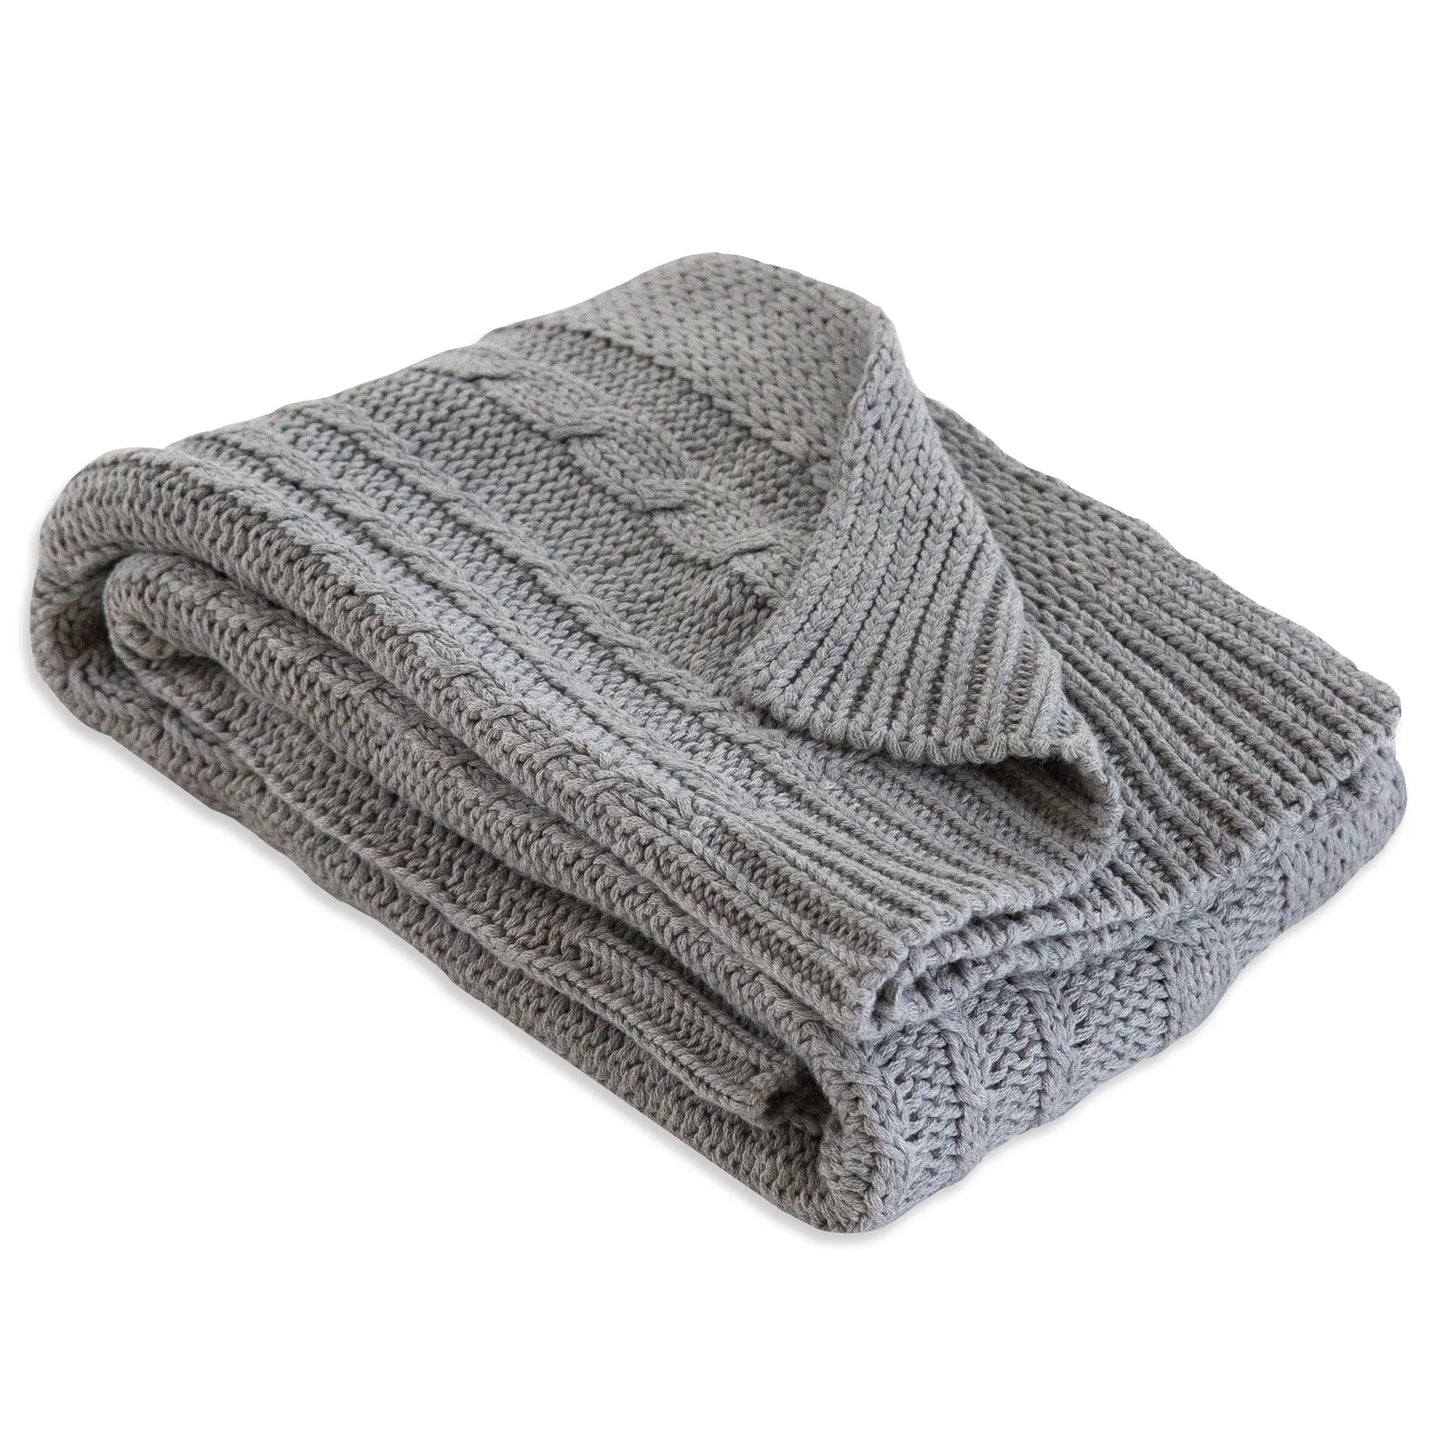 Organic Cotton Cable Knit Baby Blanket - Heather Grey